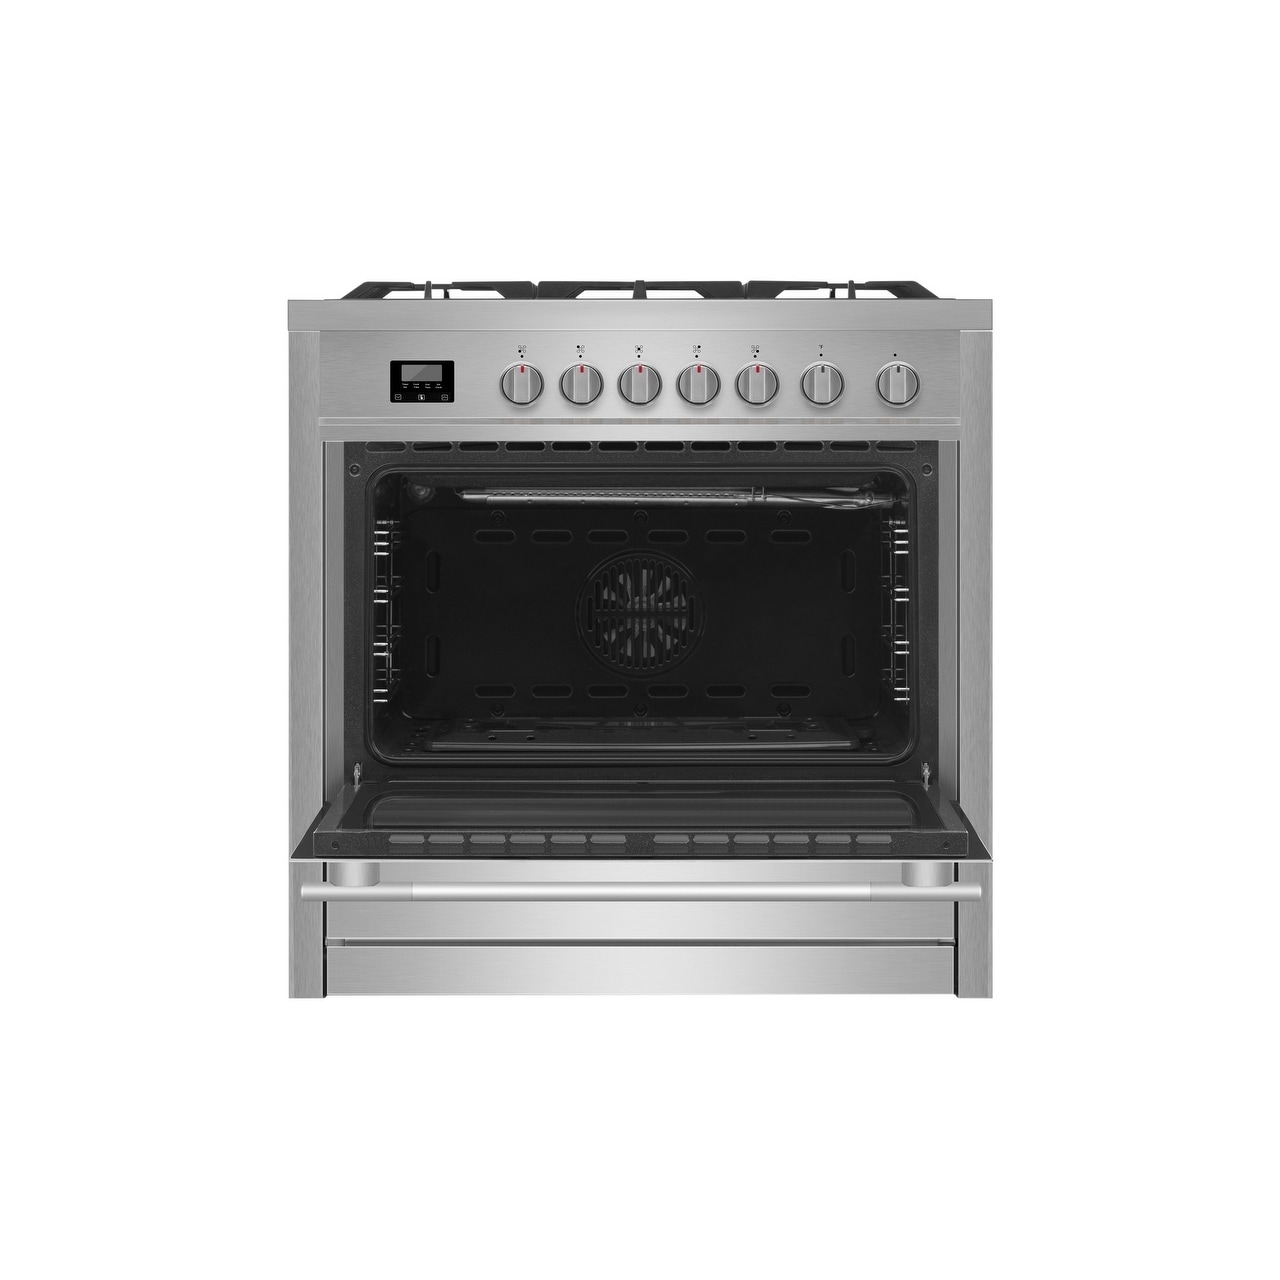 Empava 36 in ft Pro-Style Slide-in Single Oven Gas Range with 6 Sealed Ultra High-Low Burners Heavy Duty Grates in Stainless Steel 5.2 cu 